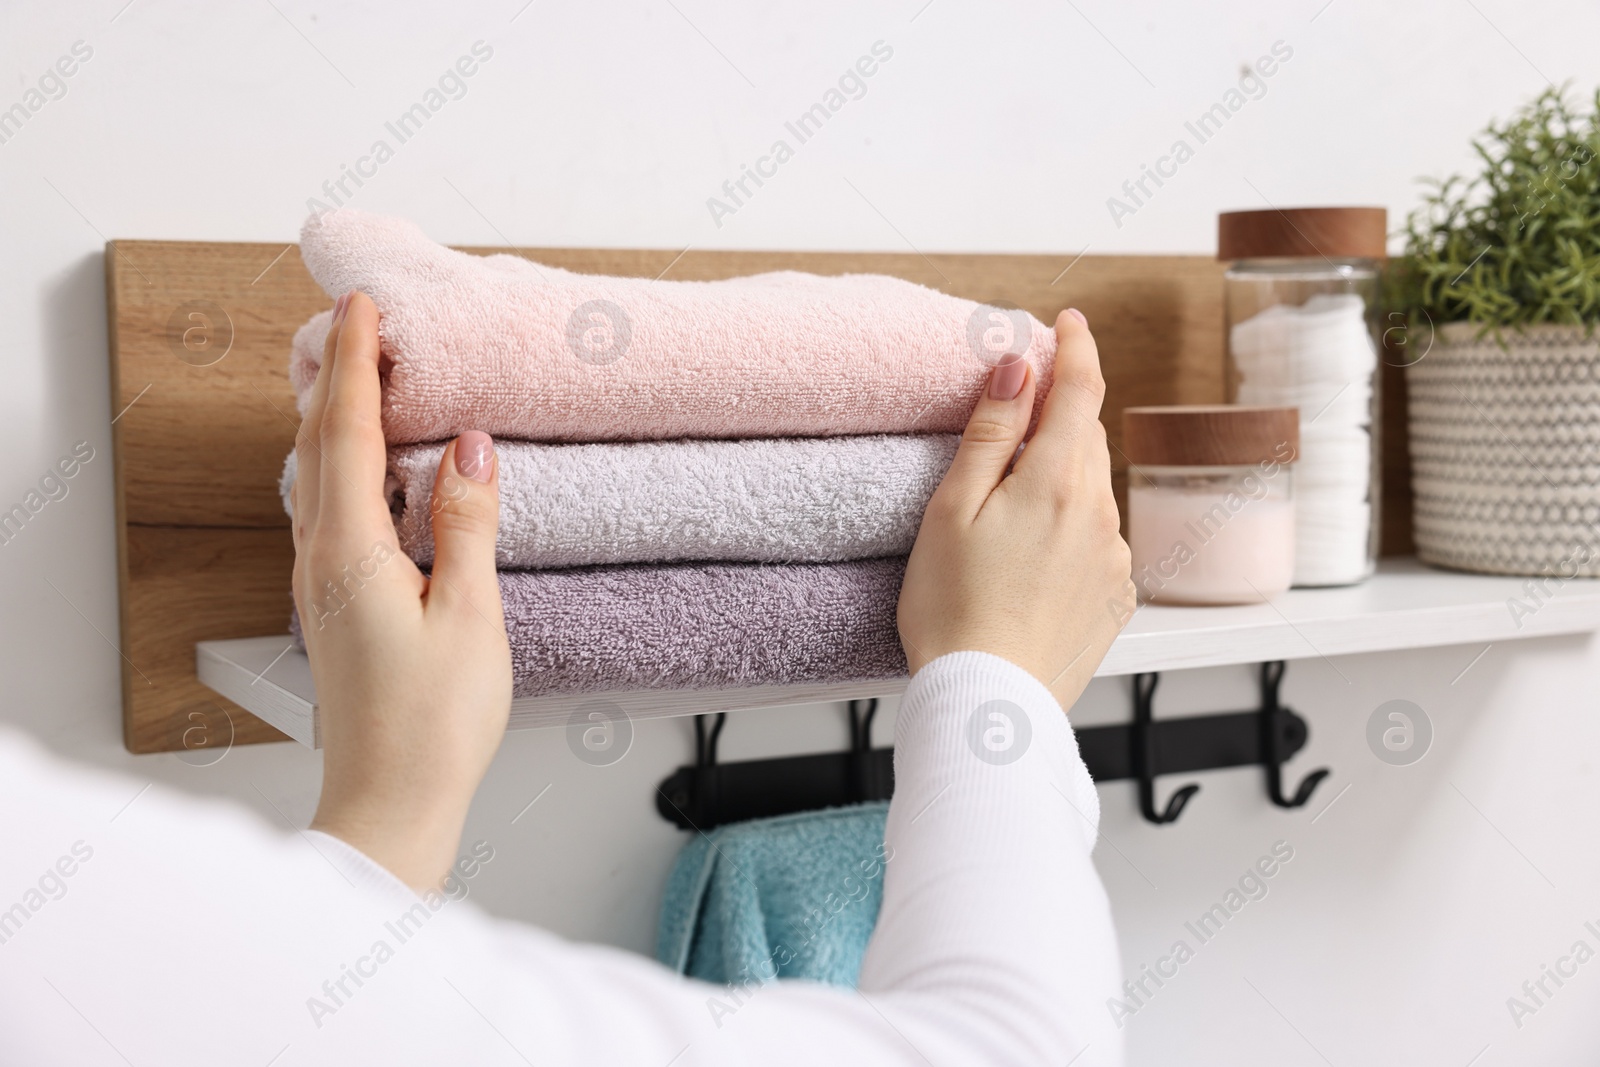 Photo of Woman stacking clean towels on shelf indoors, closeup